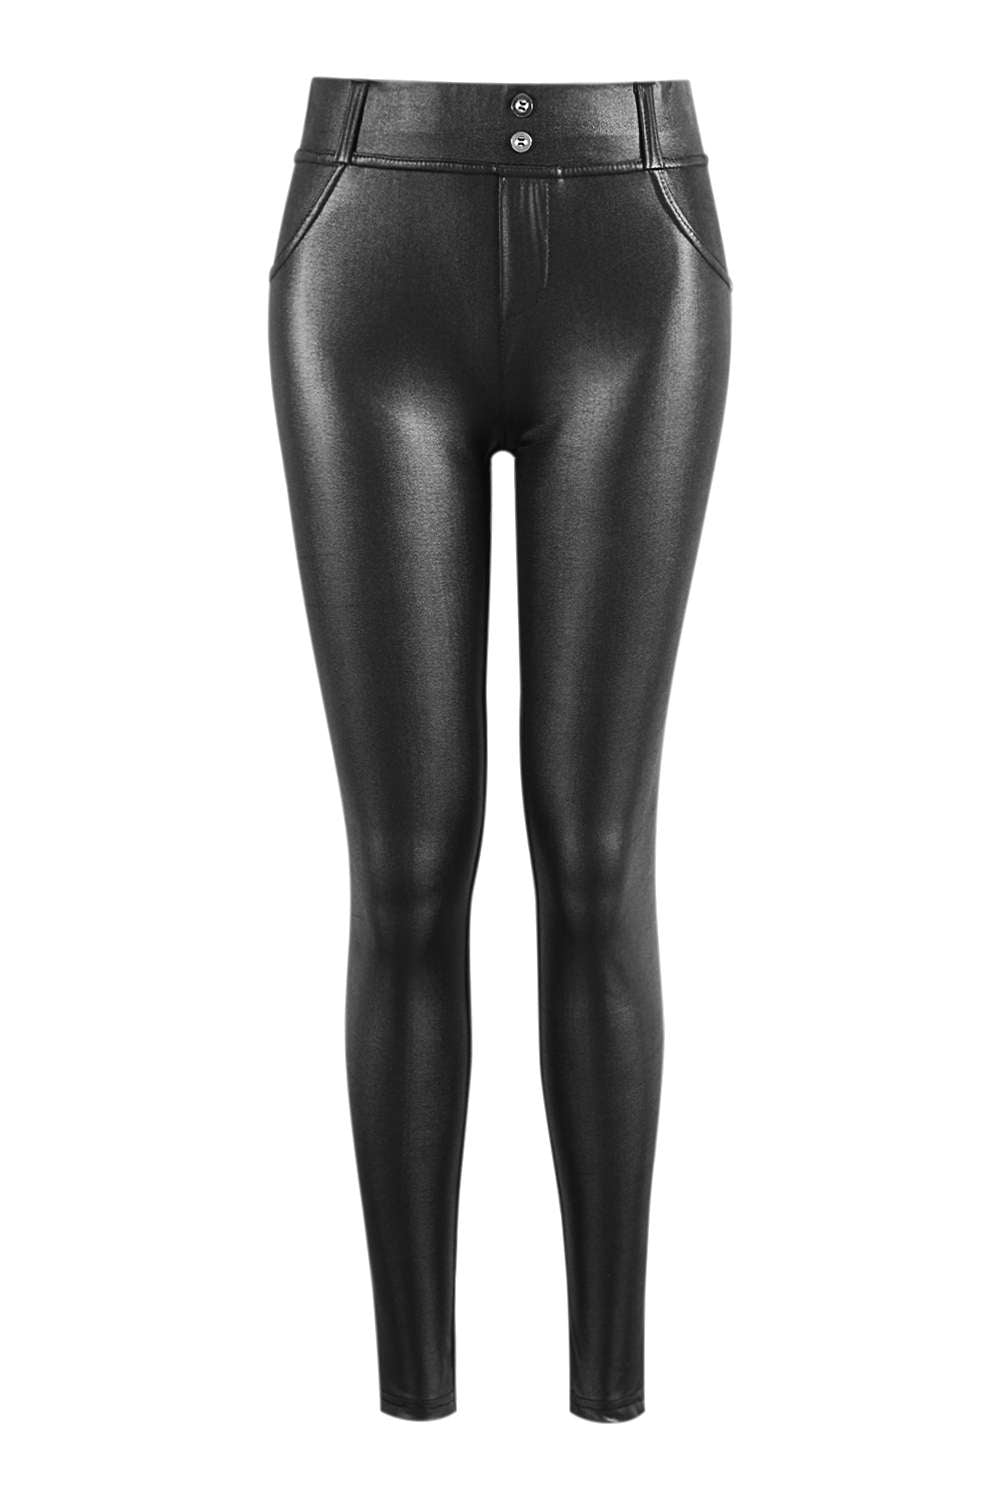 Iyasson Women's Faux Leather Pants